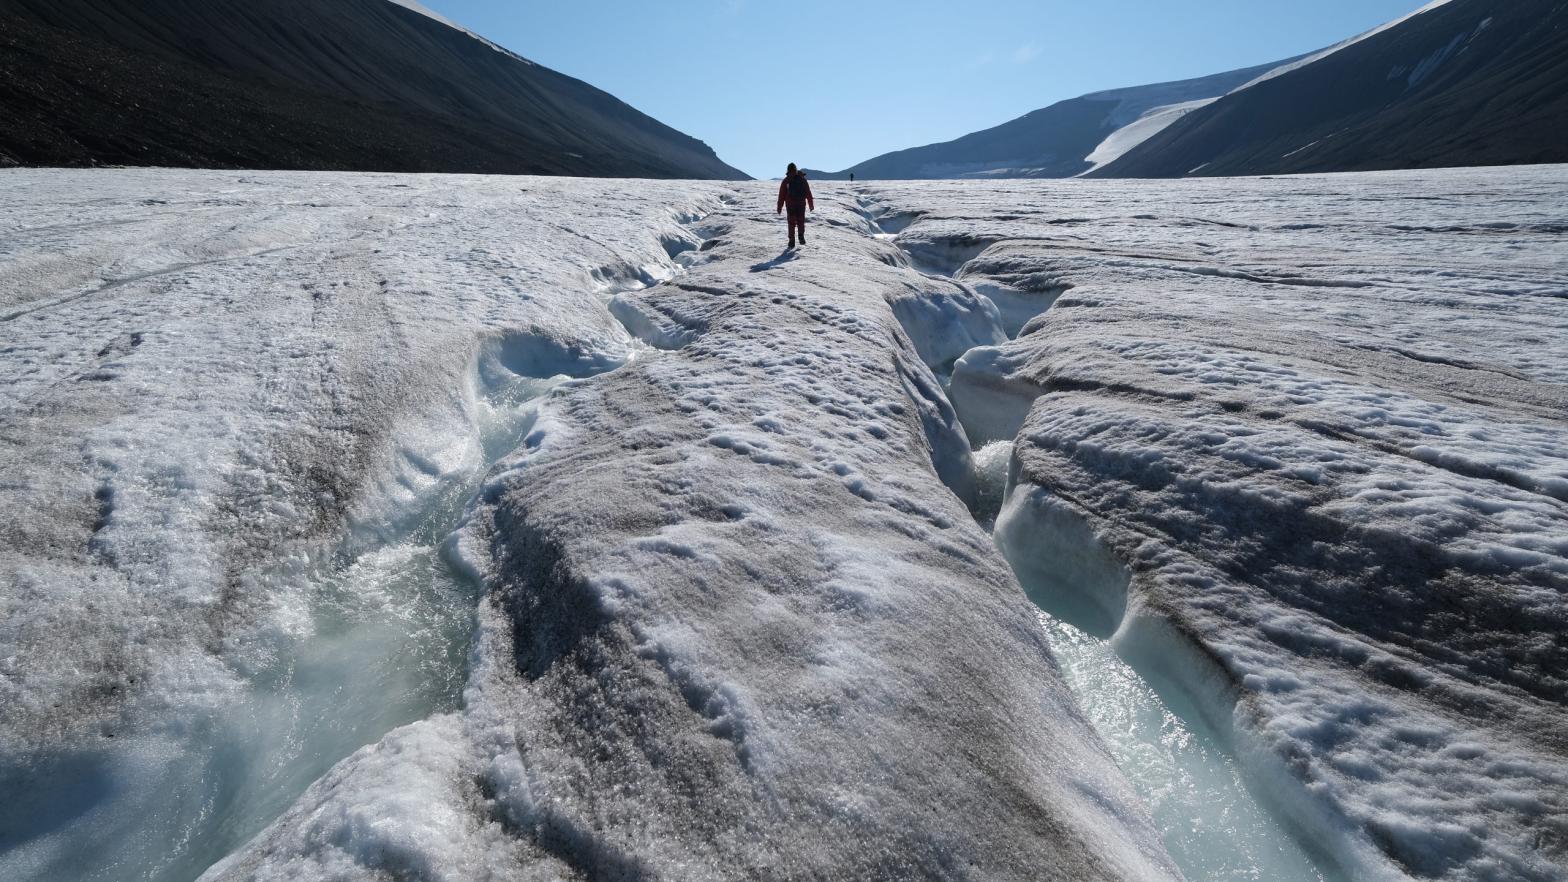 A hiker walks among winding channels carved by water on the surface of the melting Longyearbreen glacier during a summer heat wave on Svalbard archipelago on July 31, 2020. (Photo: Sean Gallup, Getty Images)